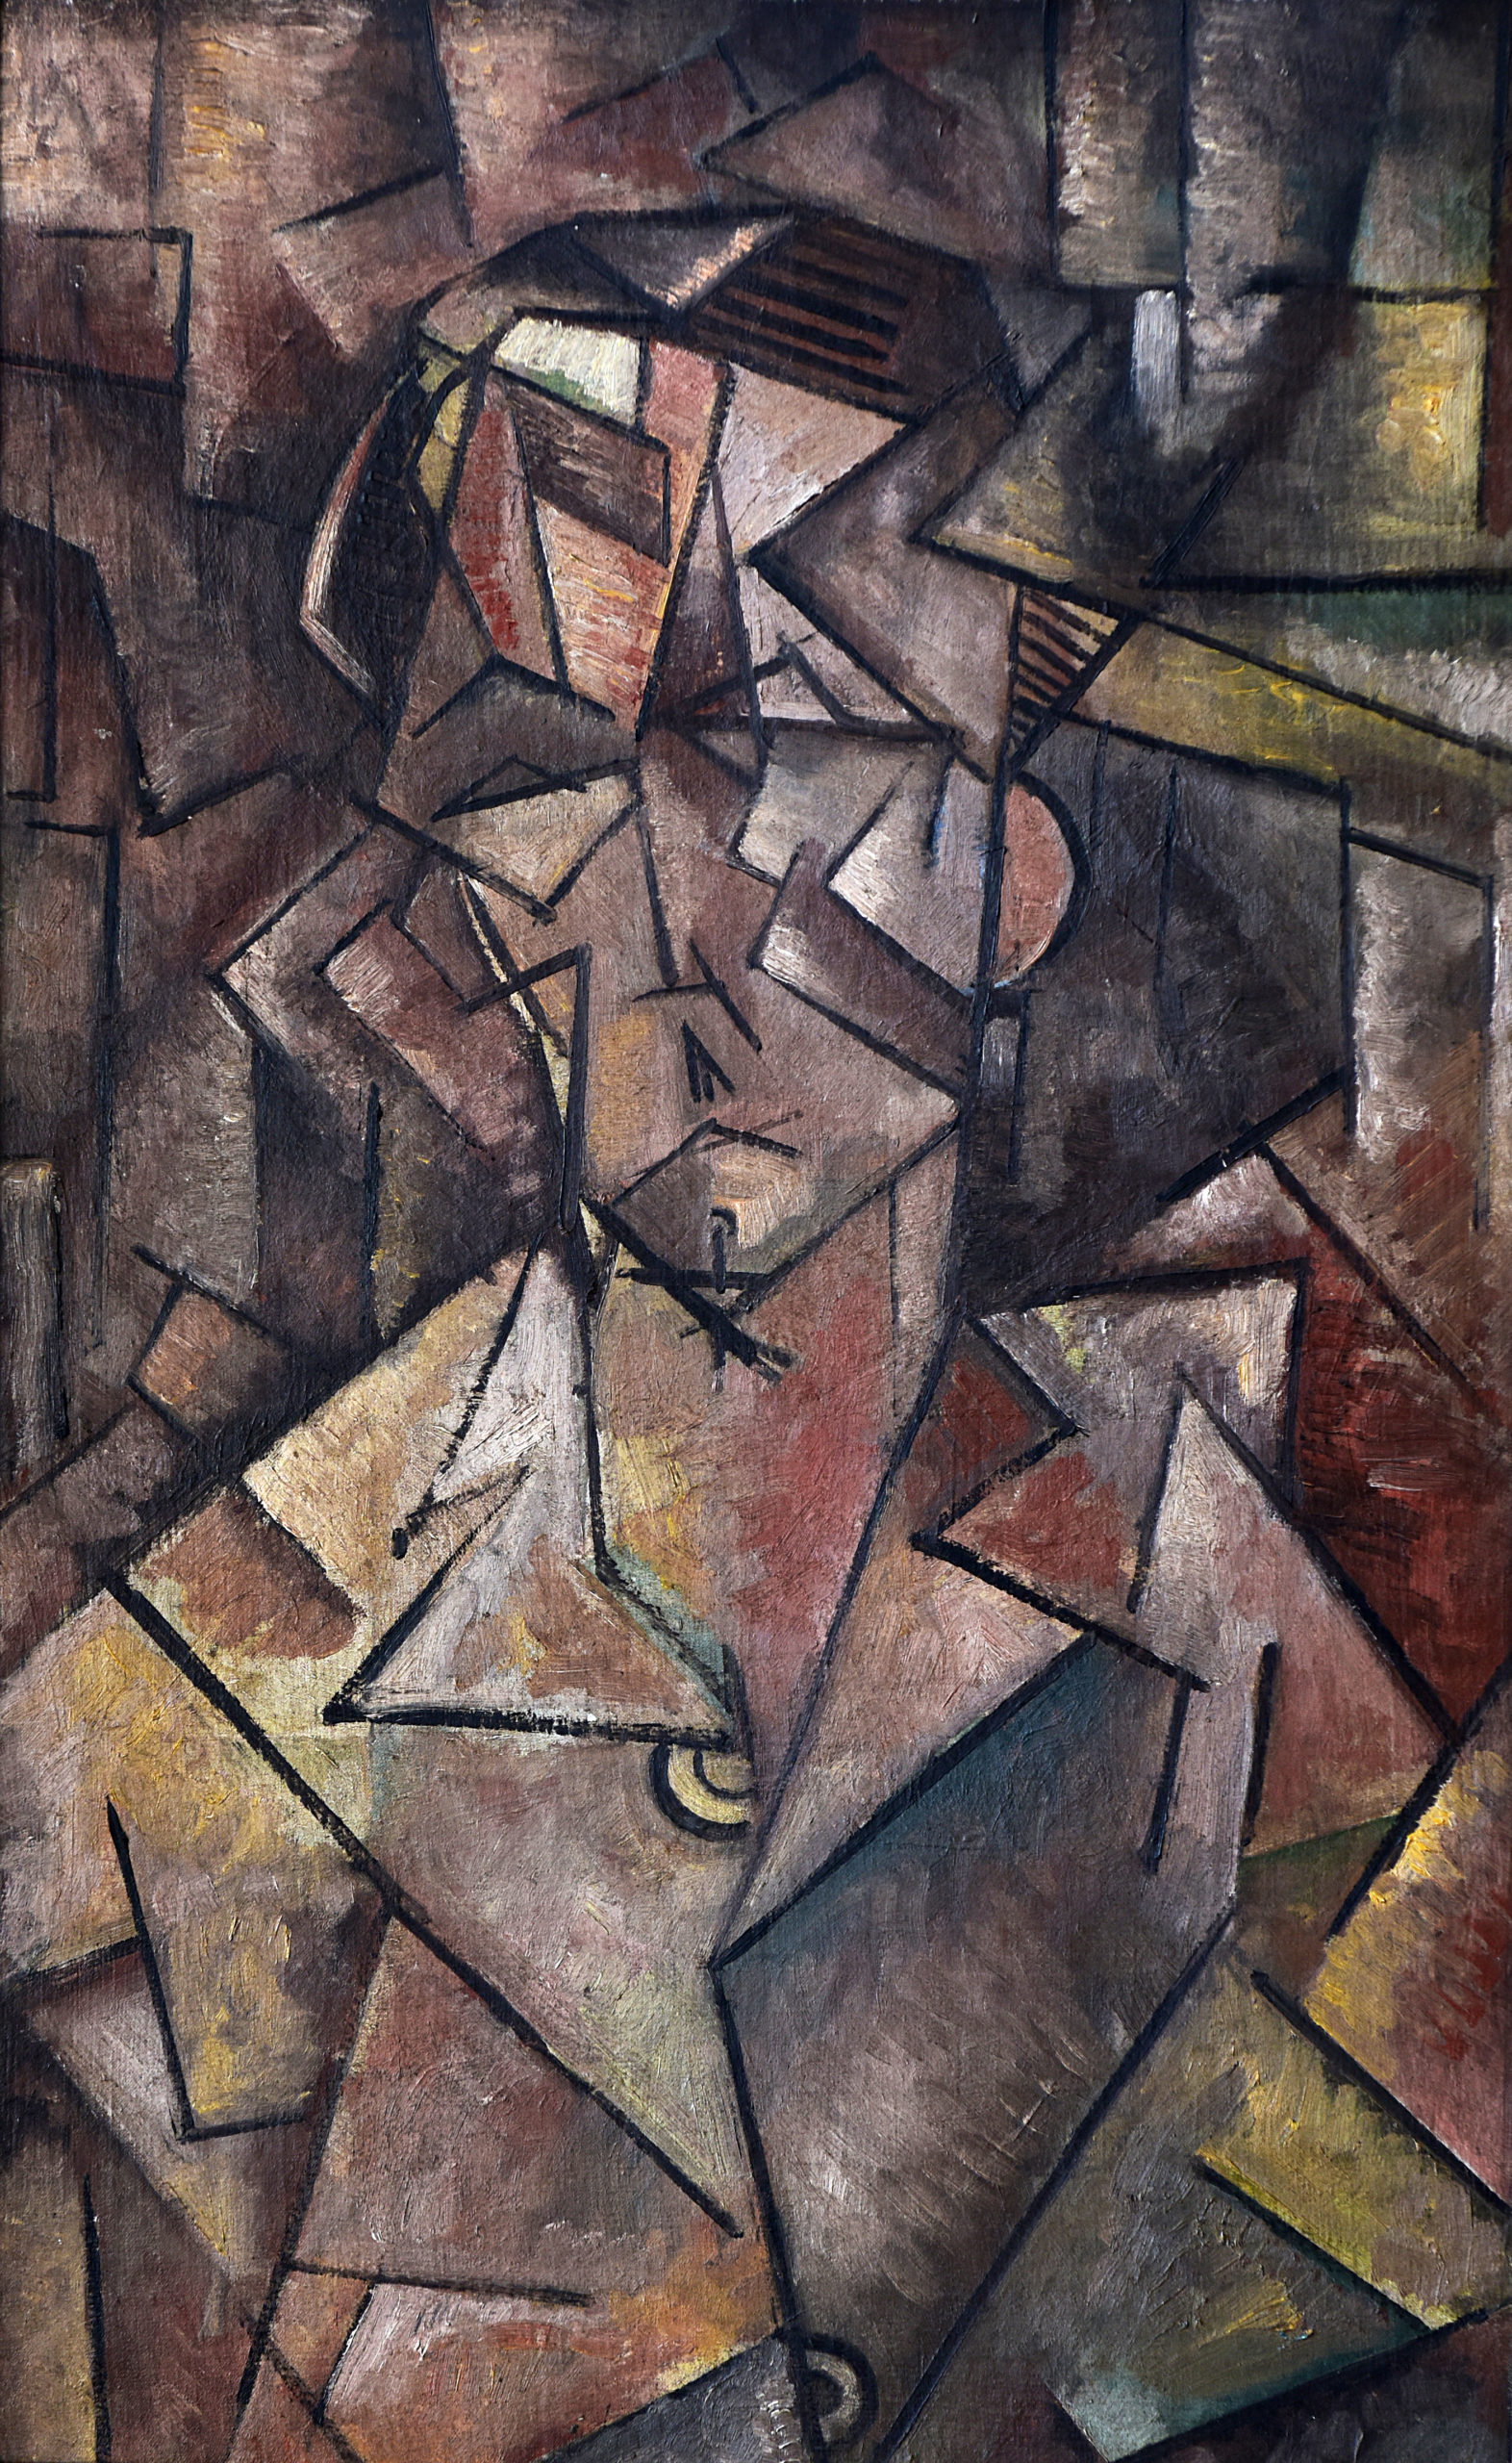 Cubist head, oil on canvas on wood, ca. 1915/18, unknown author, 48 x 75 cm